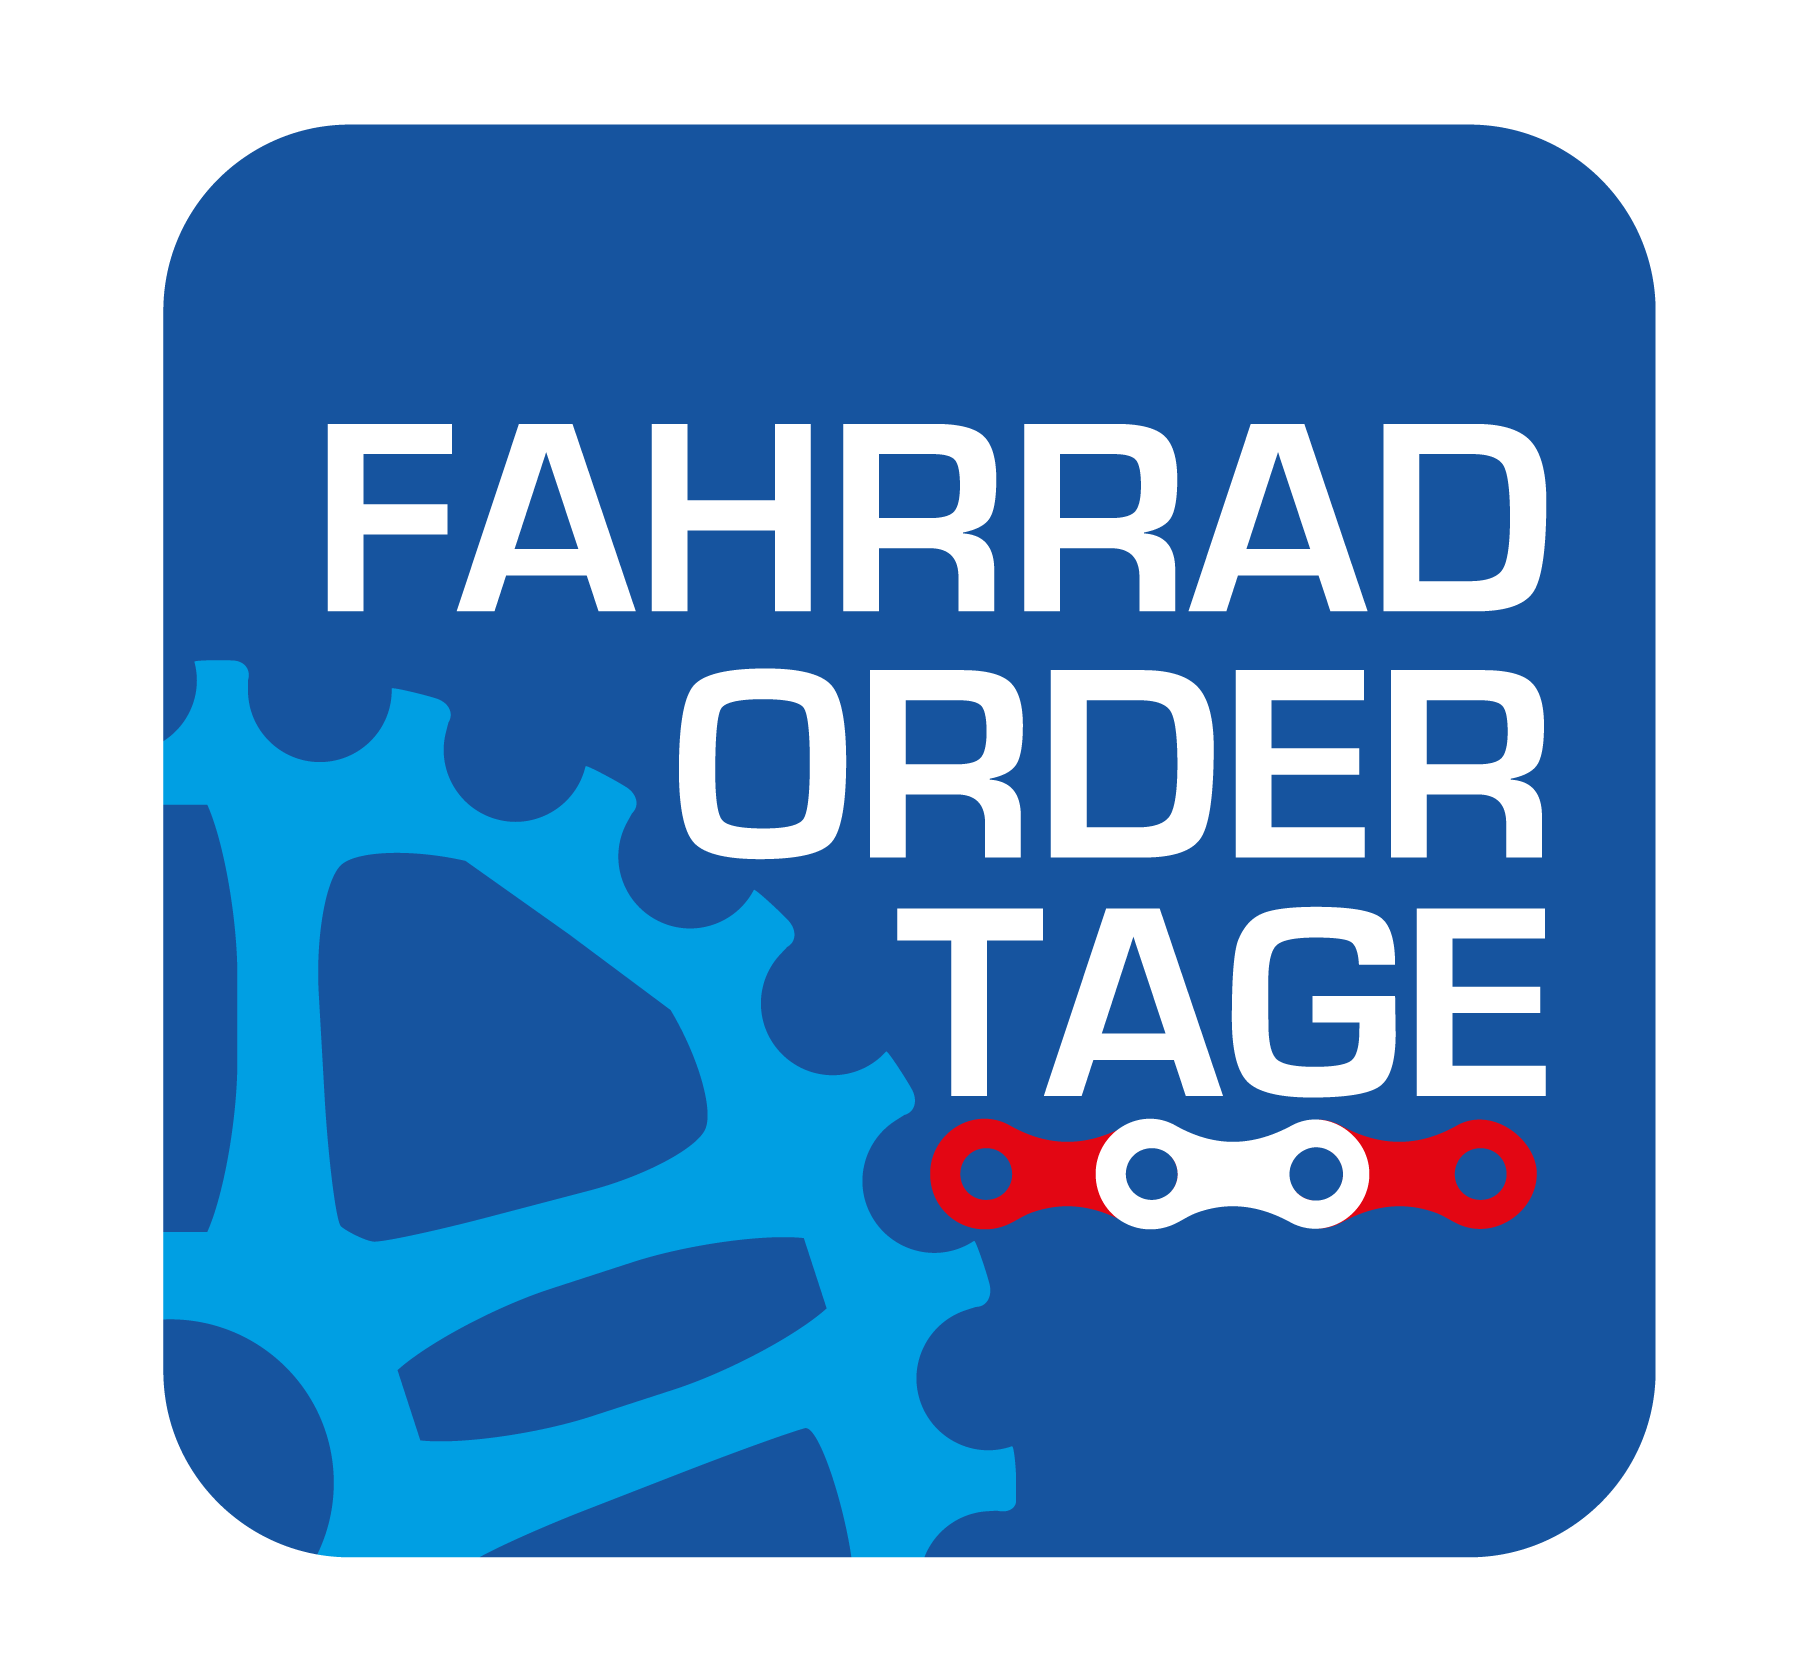 Fahrrad Ordertage 2nd edition takes place from 21 to 24 August, 2016.